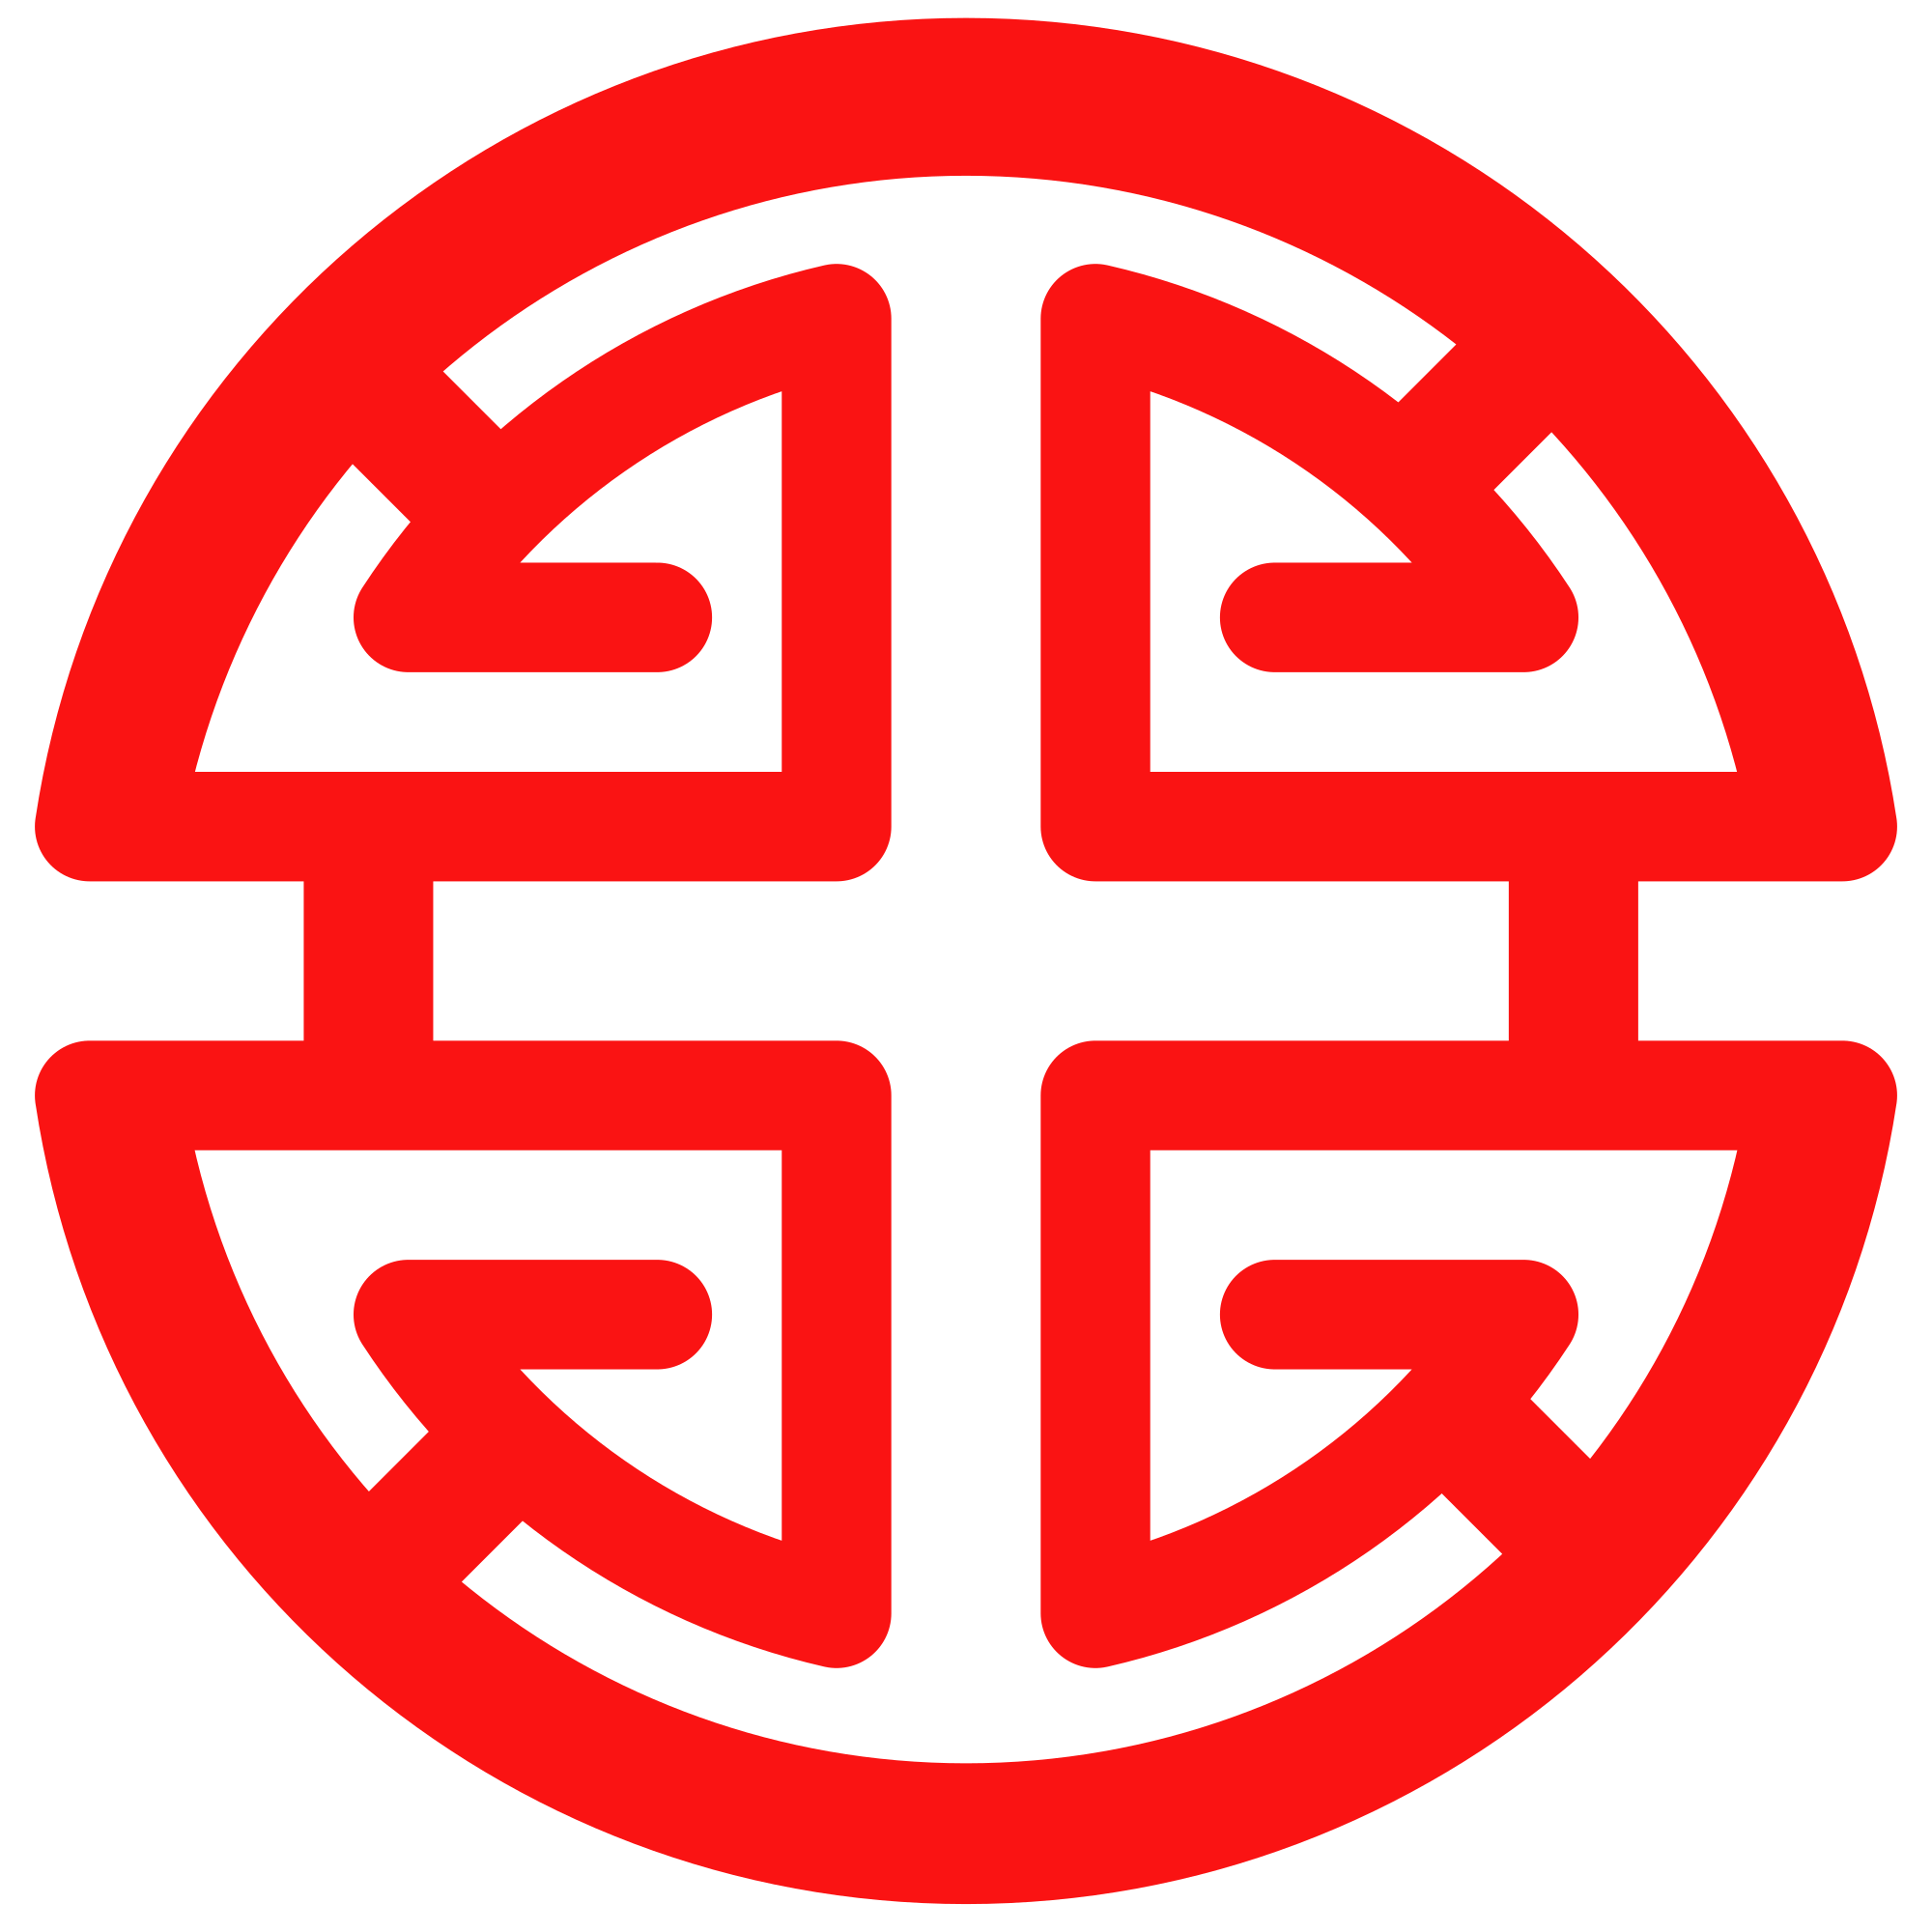 Chinese Symbol with Red Logo - File:禄 lù or 子 zi symbol---red.svg - Wikimedia Commons